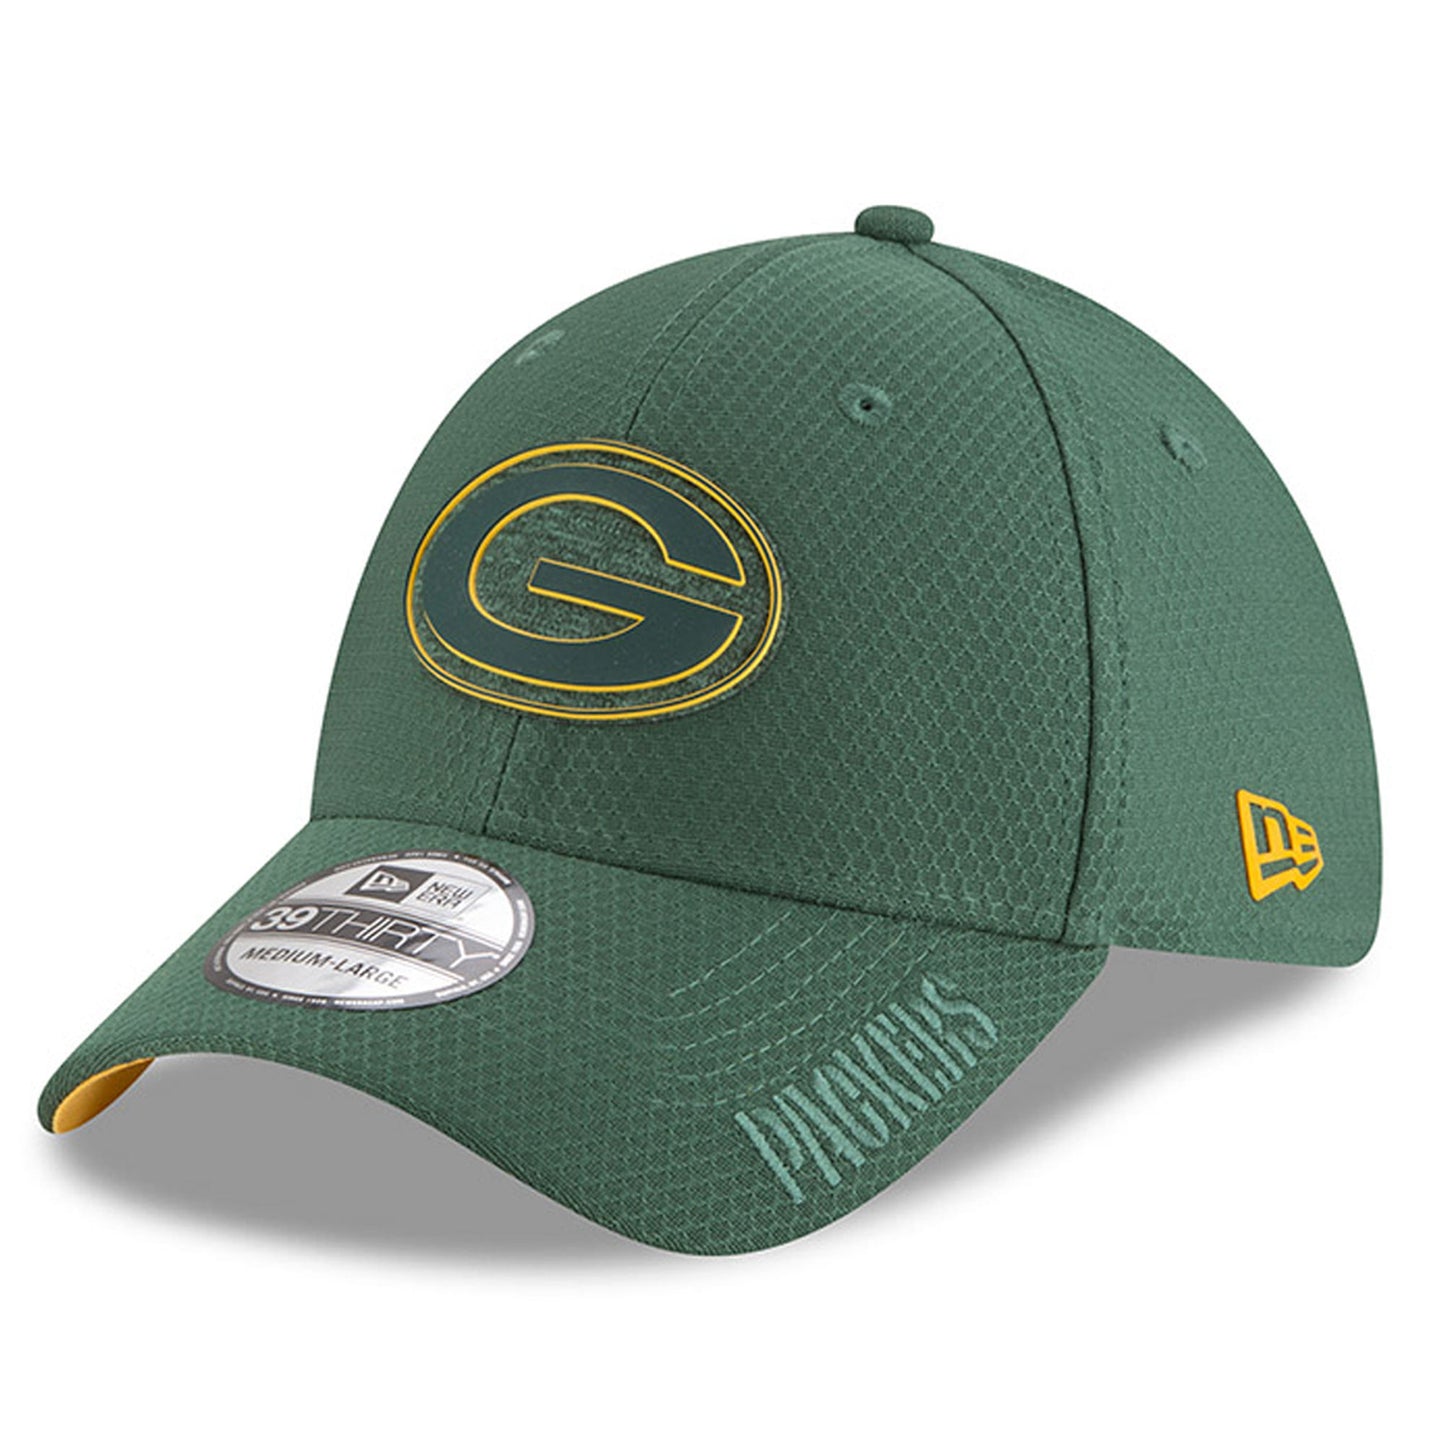 Mens New Era Green Bay Packers Green 2018 NFL Training Camp Primary 39THIRTY Flex Hat